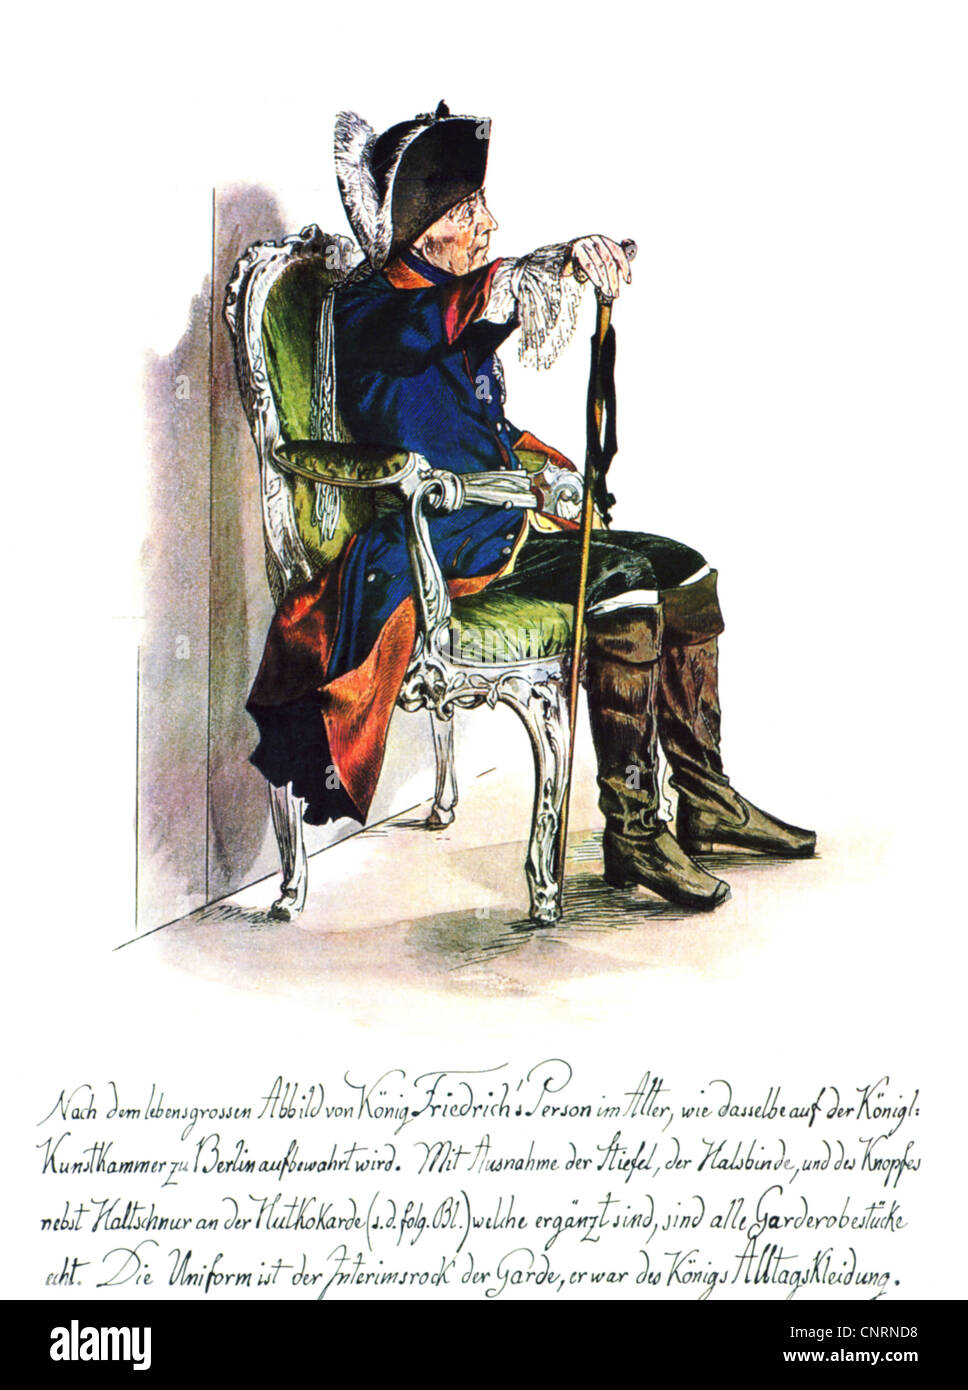 Frederick II 'the Great', 24.1.1712 - 17.6.1786, King of Prussia 31.5.1740 - 17.6.1786, sitting, coloured drawing of Adolph Menzel, 1851, after contemporary picture, Stock Photo